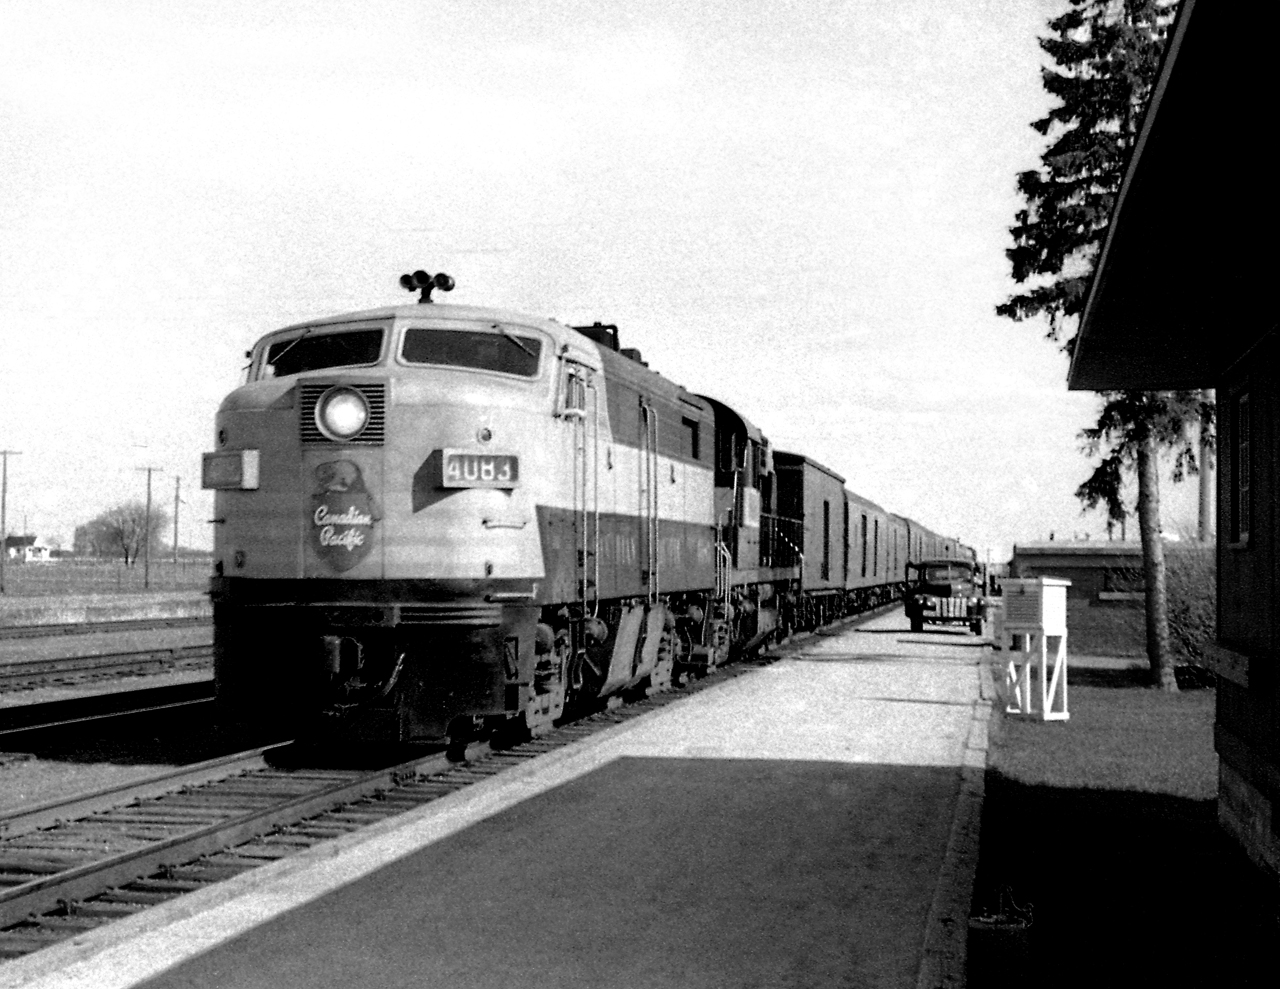 CP's westward Dominion, reduced to a primarily mail and Express train, led by an Alco FPa-2 a rarity in western Canada makes a stop at Virden. The ancient even by 1964 standards on the platform   belongs to the Post Office contractor. Express business was big, the Purolators, UPS, FedEx of the time when the railroads were the lifeblood on goods transportation.